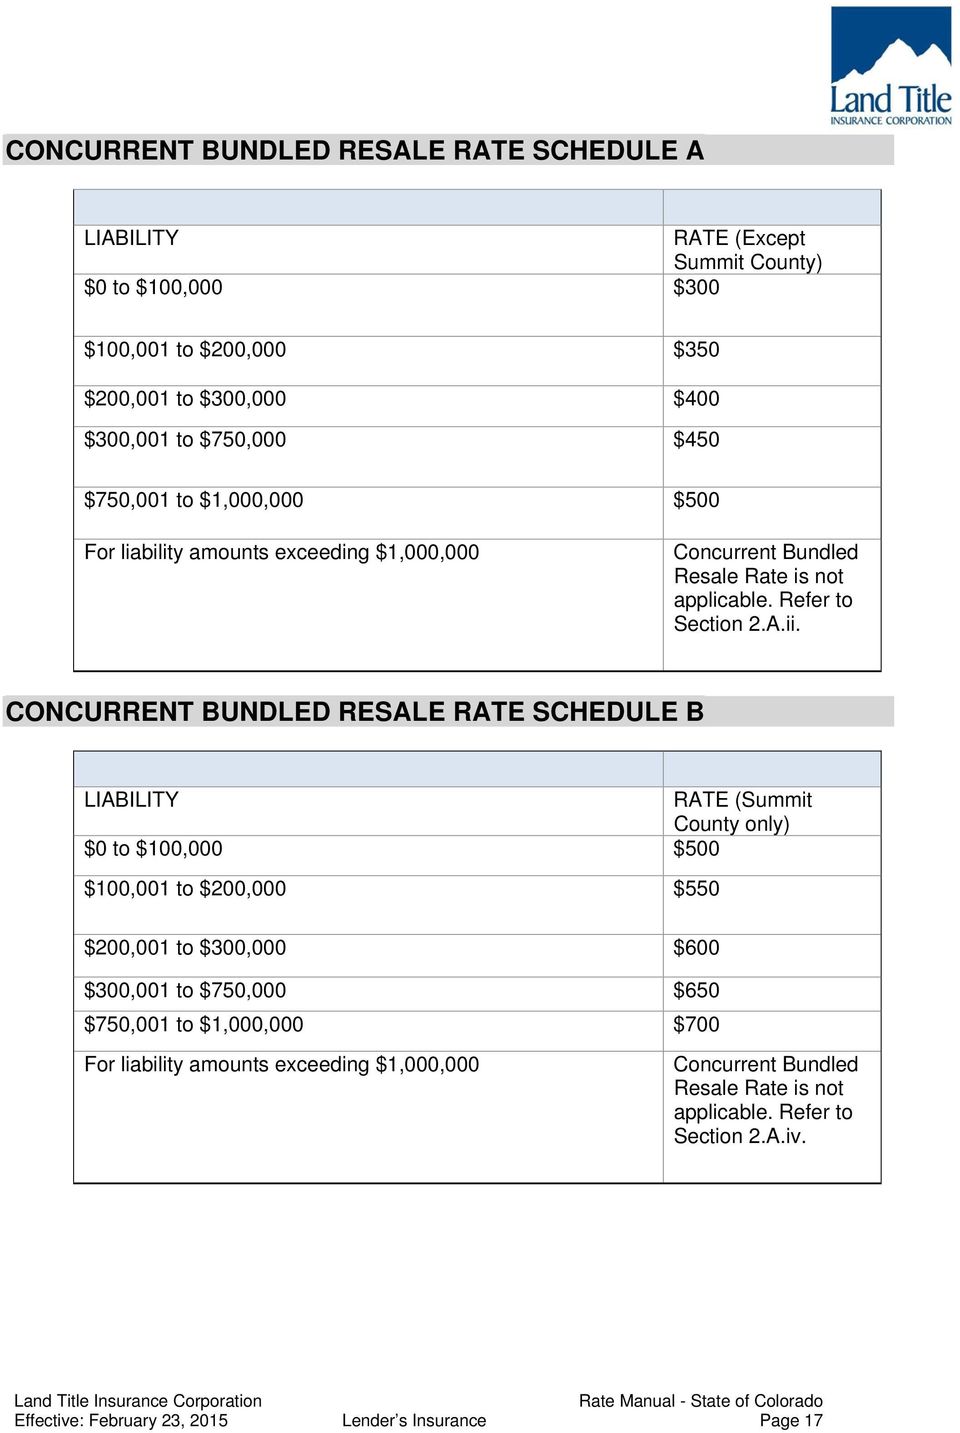 CONCURRENT BUNDLED RESALE RATE SCHEDULE B LIABILITY RATE (Summit County only) $0 to $100,000 $500 $100,001 to $200,000 $550 $200,001 to $300,000 $600 $300,001 to $750,000